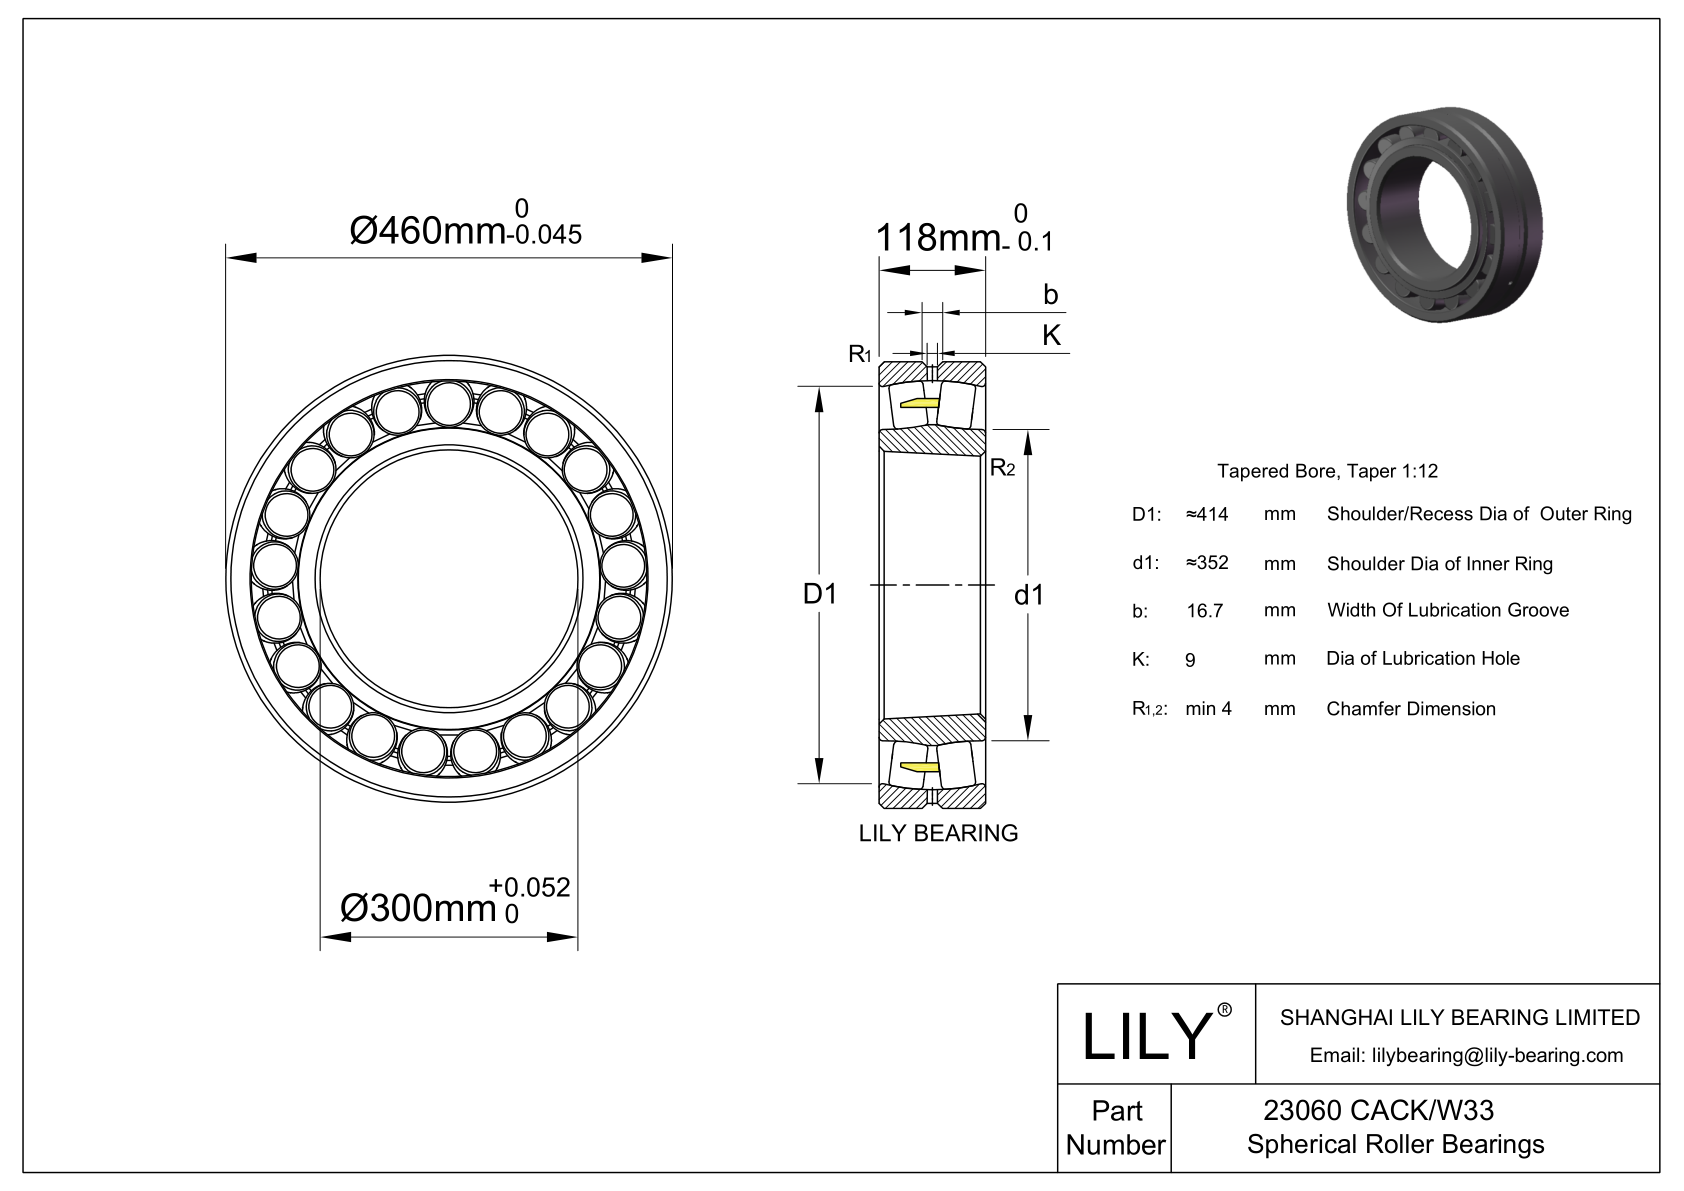 23060 CACK/W33 Double Row Spherical Roller Bearing cad drawing